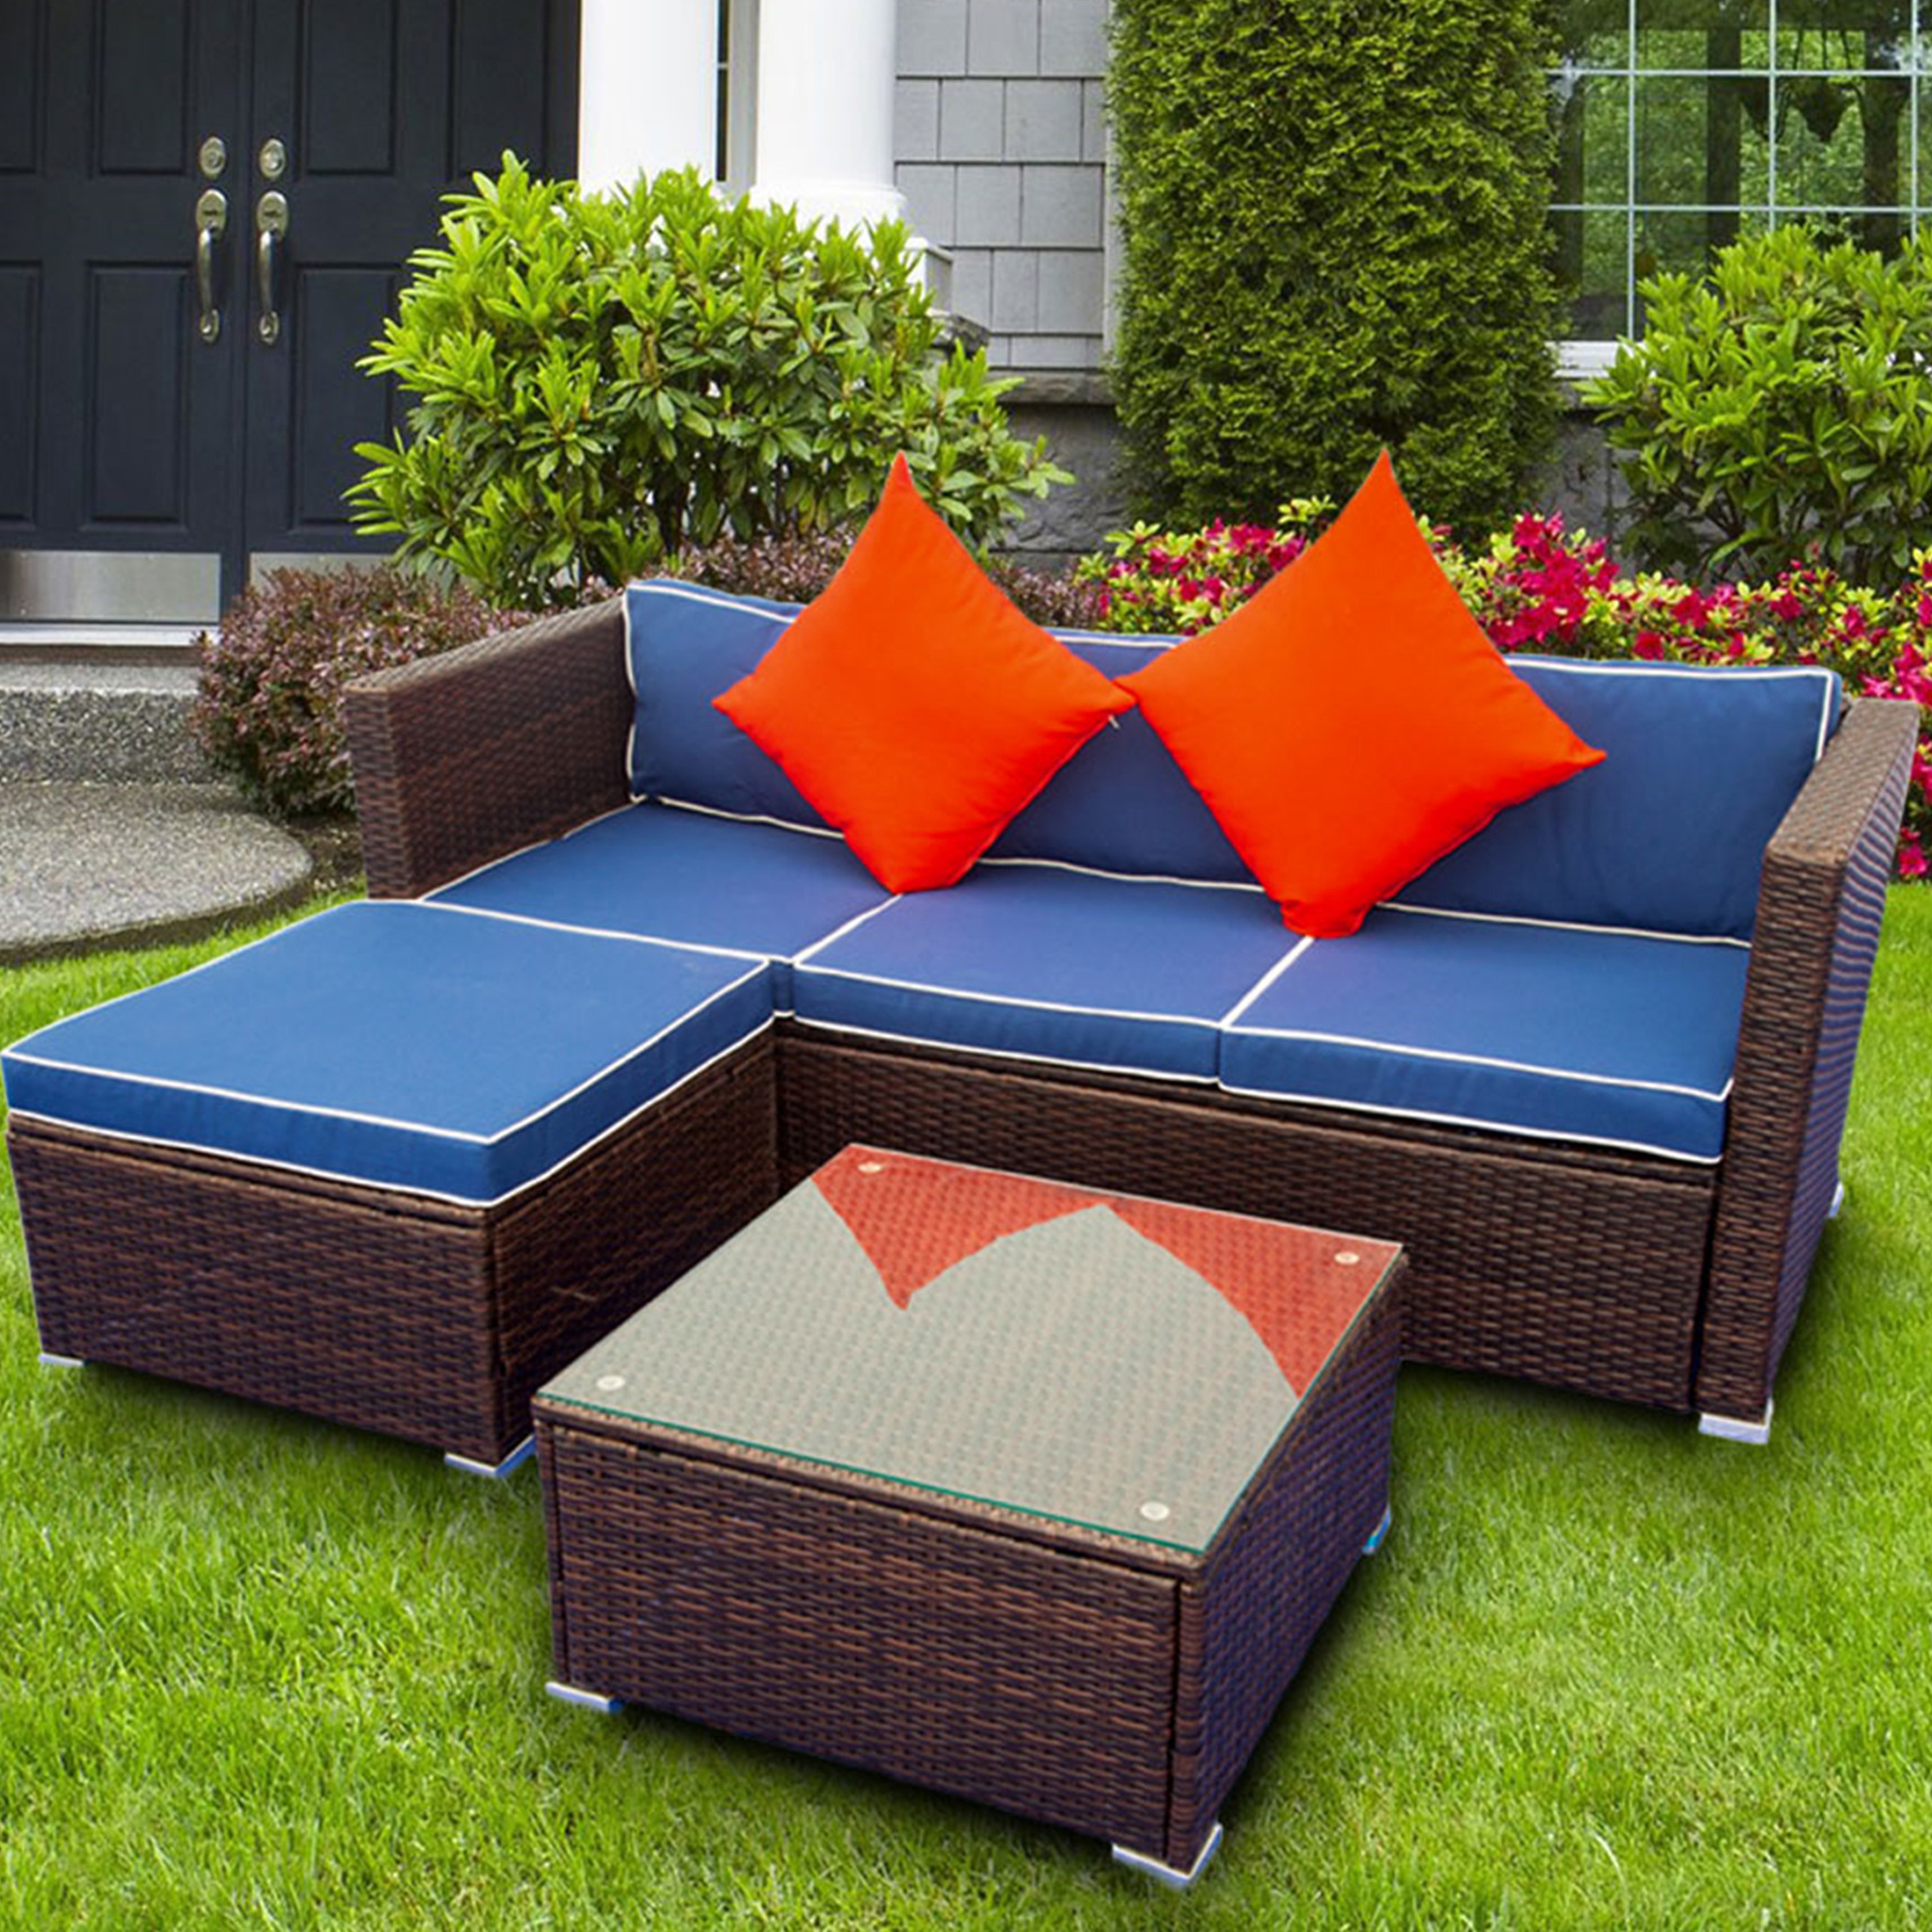 Outdoor Patio Furniture Sets, 3 Piece Ratten Wicker Sectional Sofa Set, Patio Furniture with 3-Seating Sofa, 1 Ottoman & Coffee Table, Patio Conversation Sets for Backyard Lawn Garden, Blue, W10965 - image 3 of 11